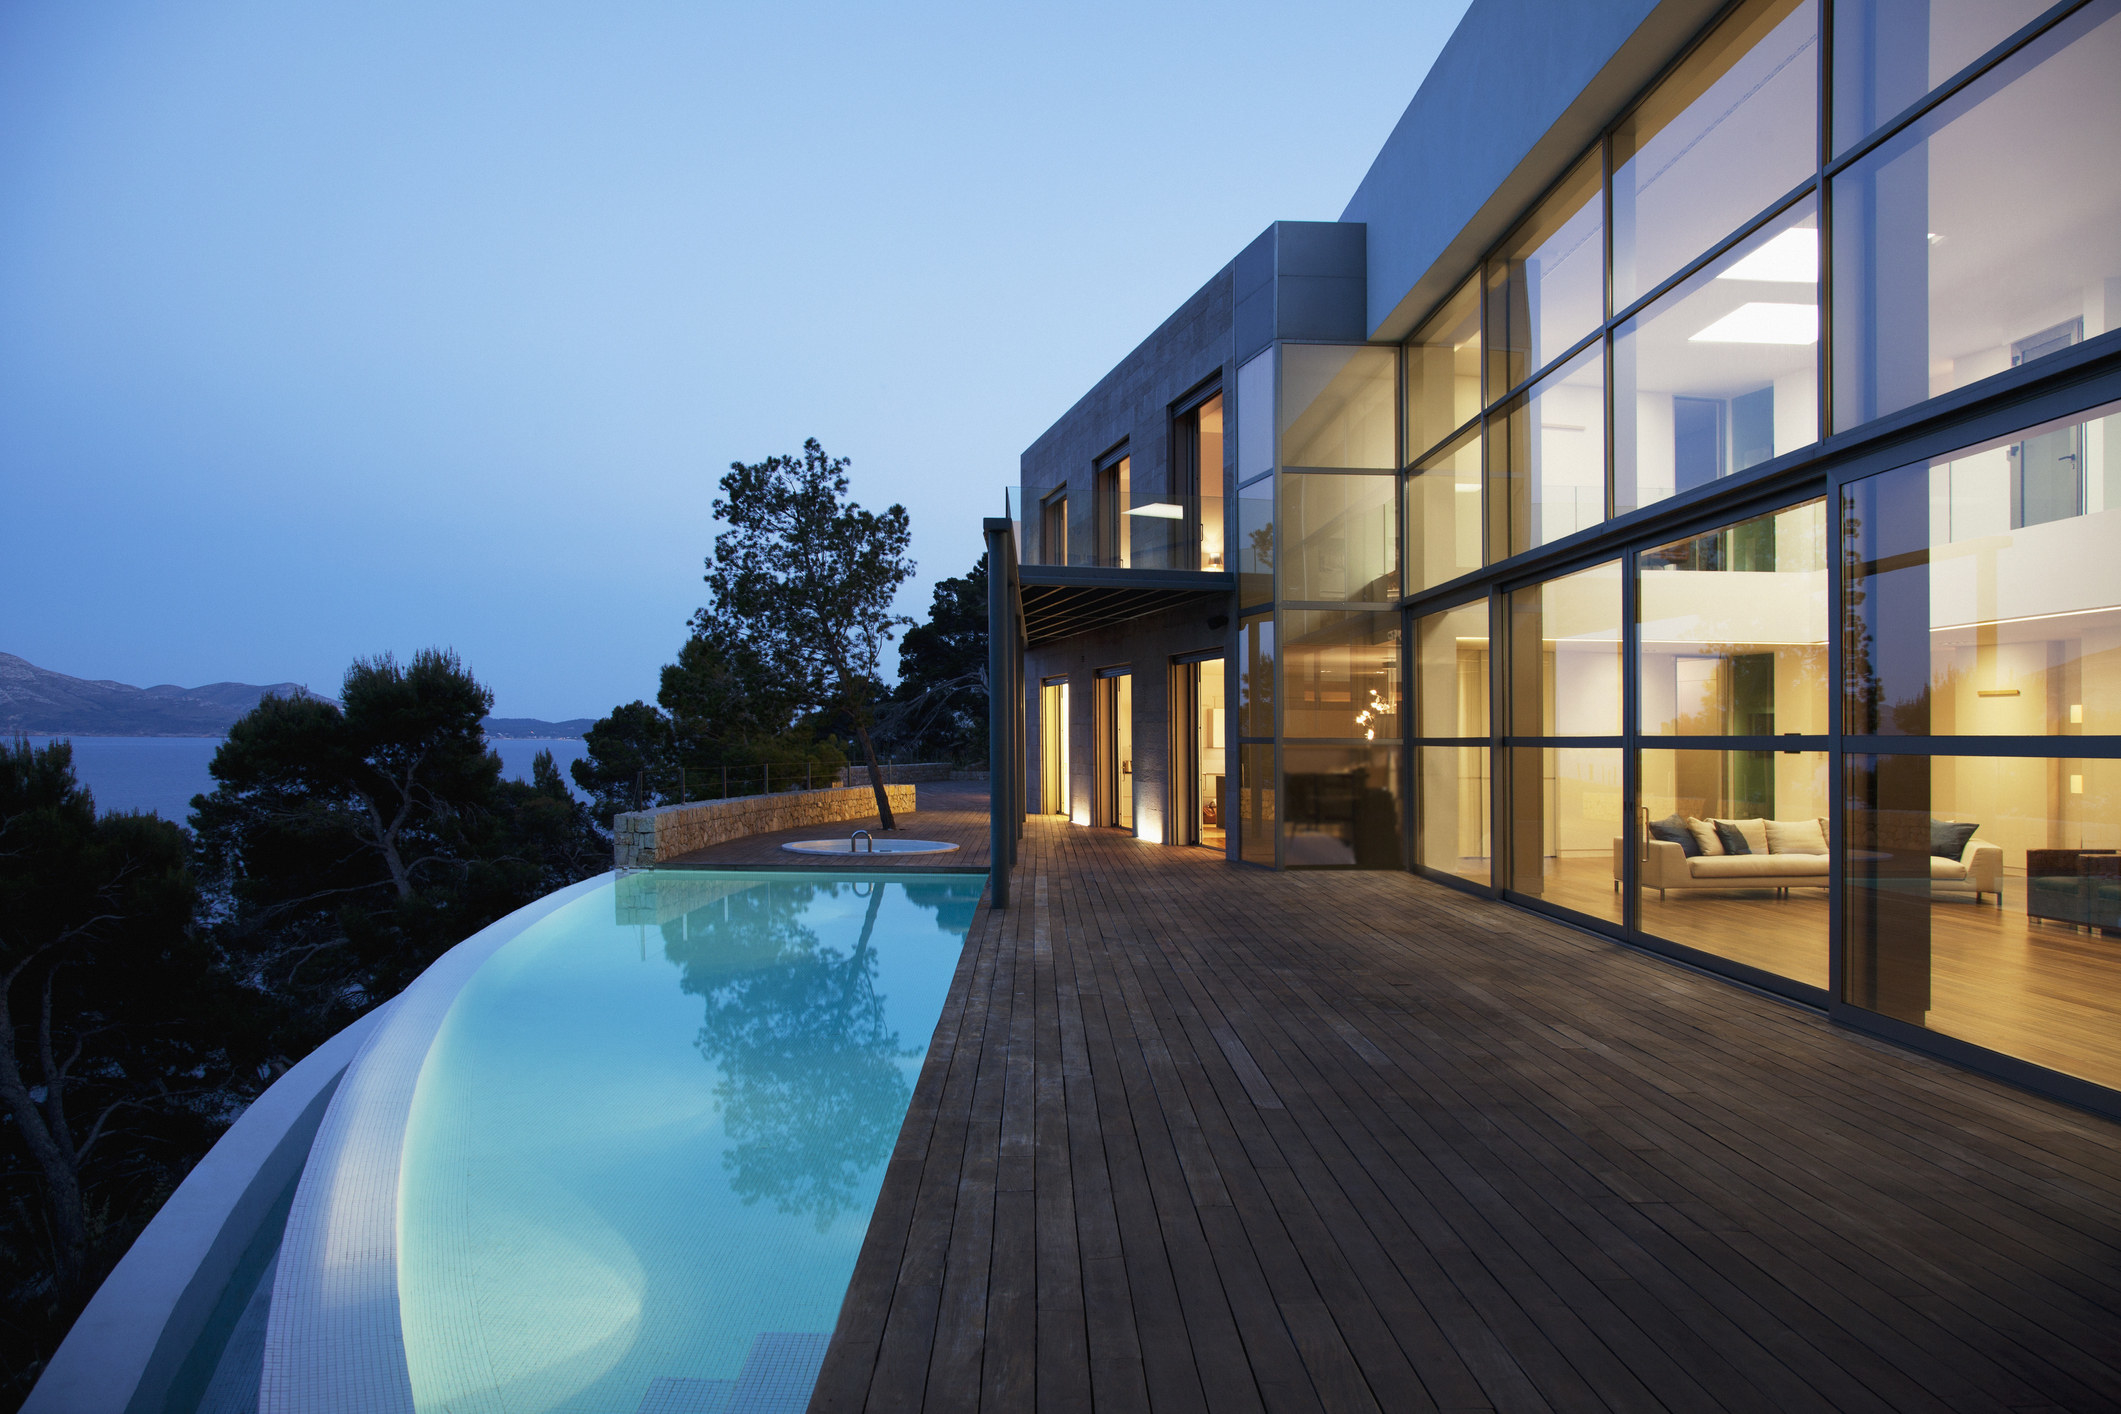 The exterior of a large house with an infinity pool